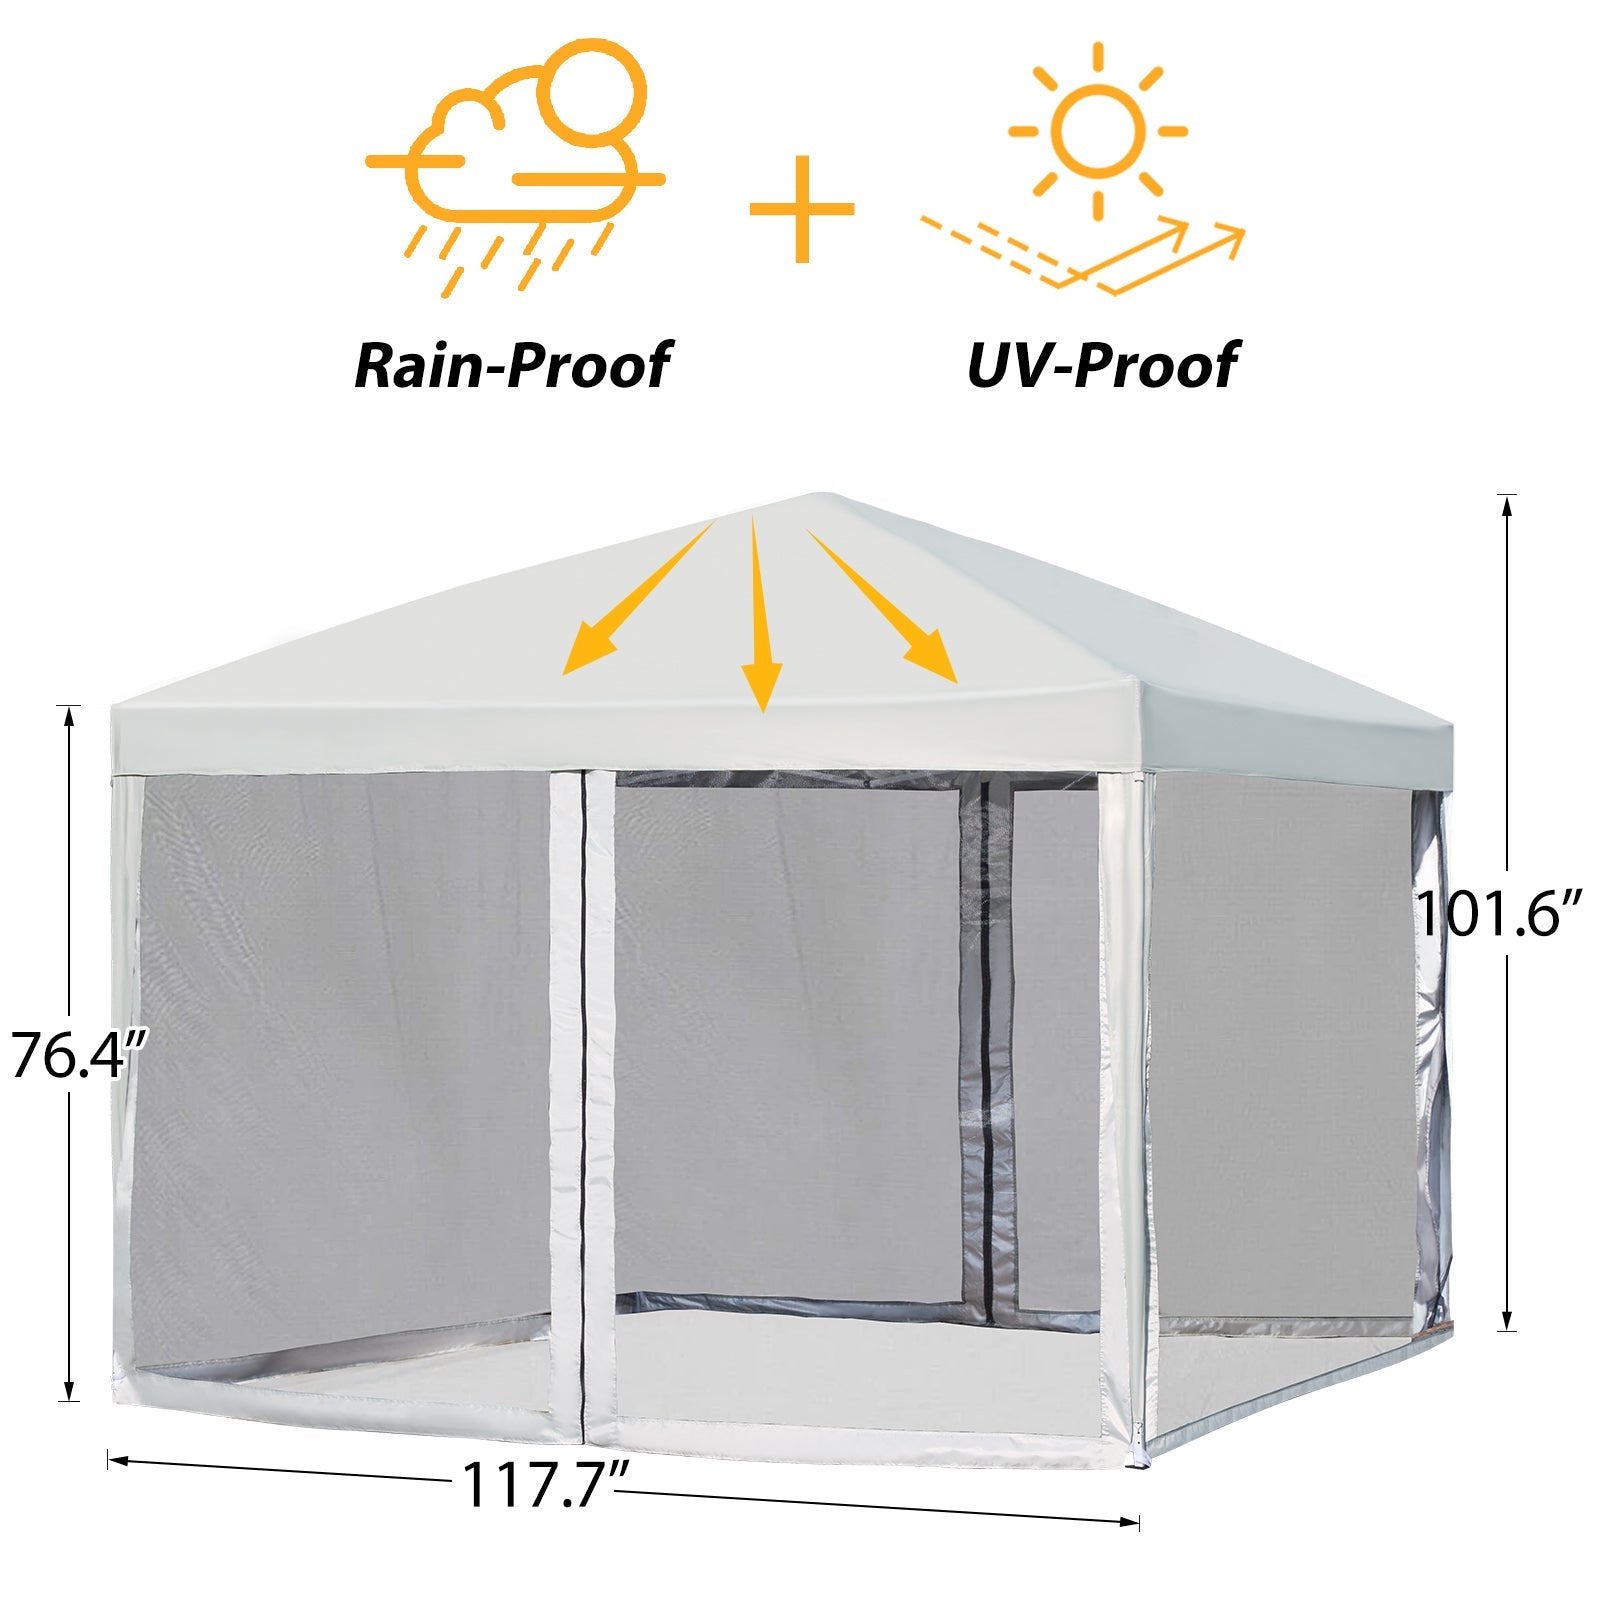 AVAWING 10'x10' Pop up Canopy with Sidewalls Wheeled Roller Bag, Waterproof & Anti-UV Canopy Tent for Outside, Parties, Exhibition, Picnic with Sandbags x 4, Ropes x 4 (White)